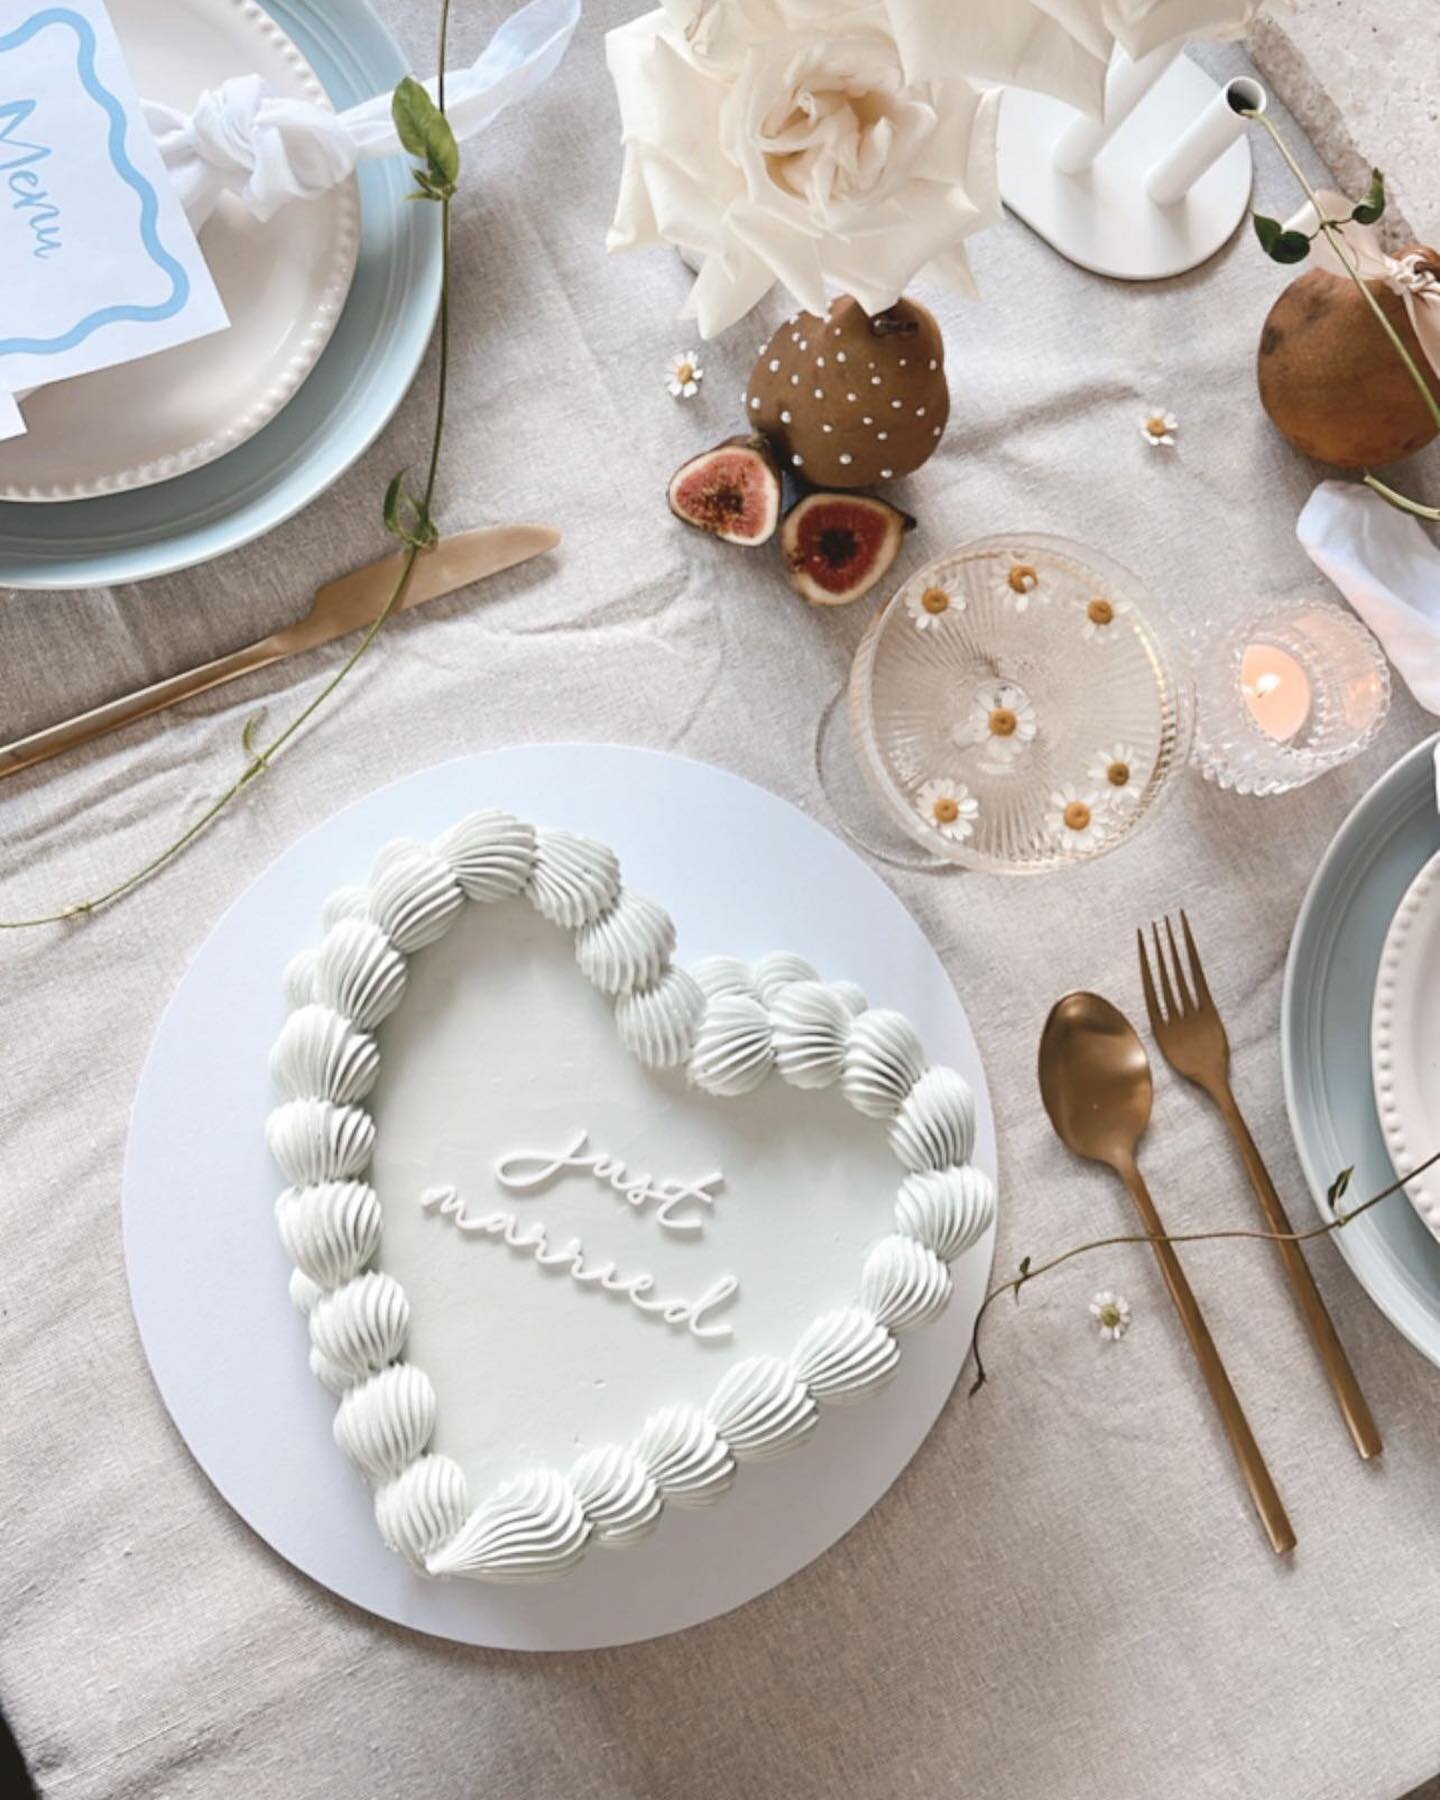 JUST MARRIED / this classic style heart cake is definitely having a rebirth and I&rsquo;m very thrilled about it! We went to Sydney a few weeks ago and this one came with us! I dropped it into @bloomstudios.co_ for a styled shoot among all these gorg